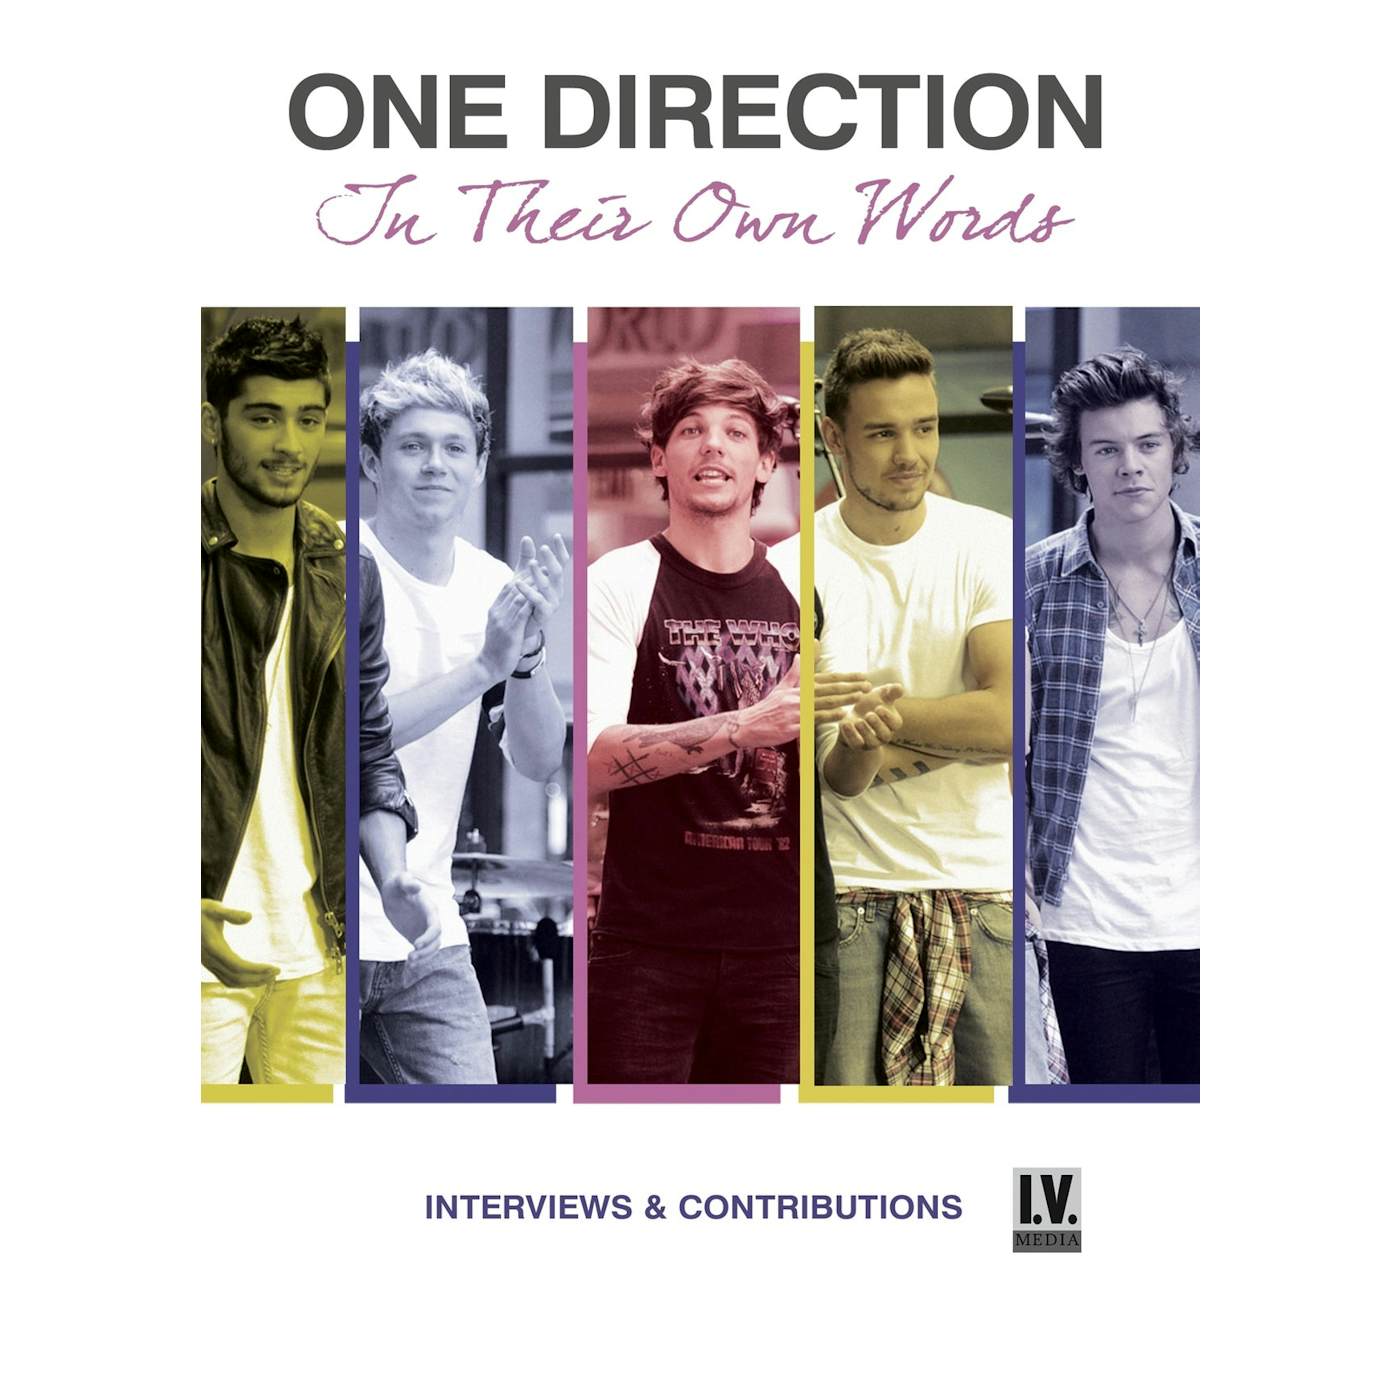 One Direction DVD - In Their Own Words